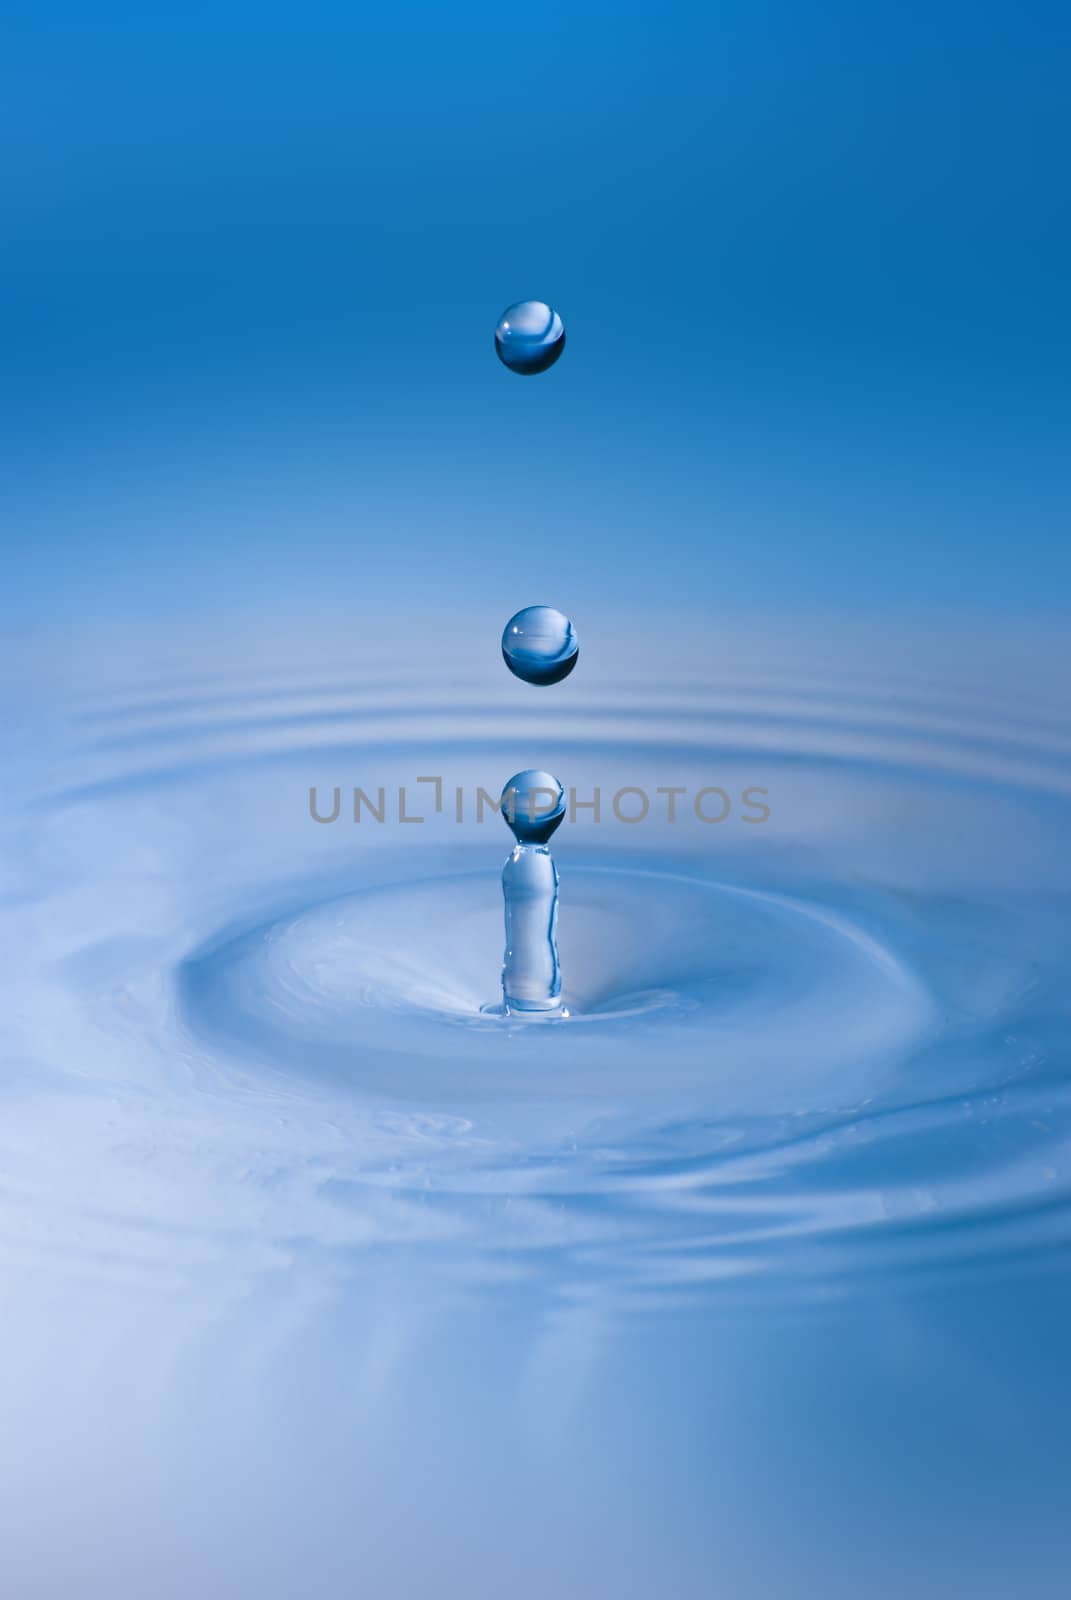 Clean blue drop of water splashing in clear water. Abstract blue by mozzyb